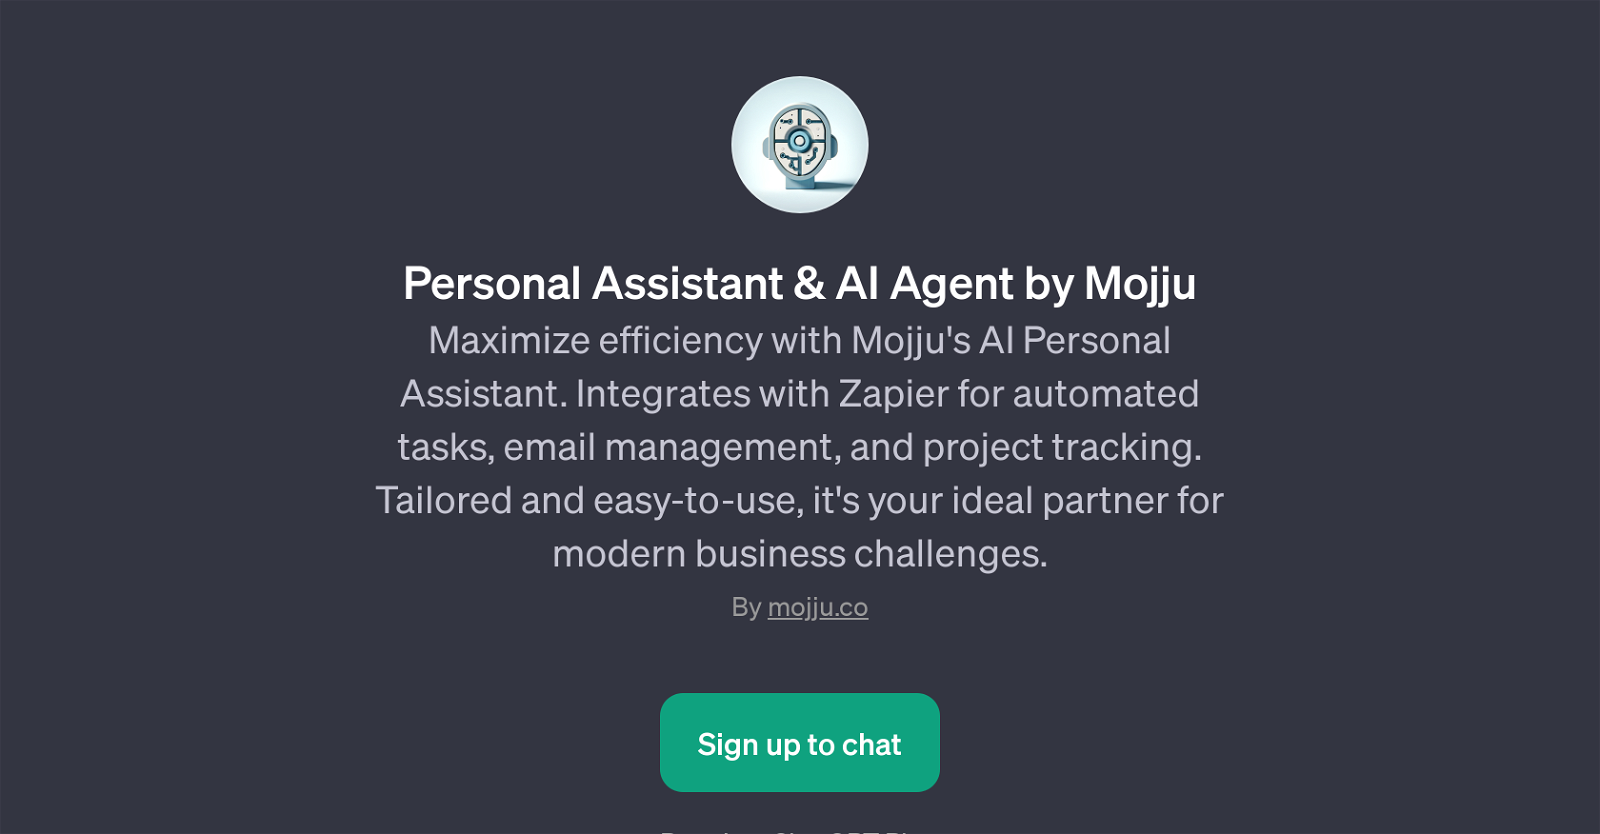 Personal Assistant & AI Agent by Mojju website